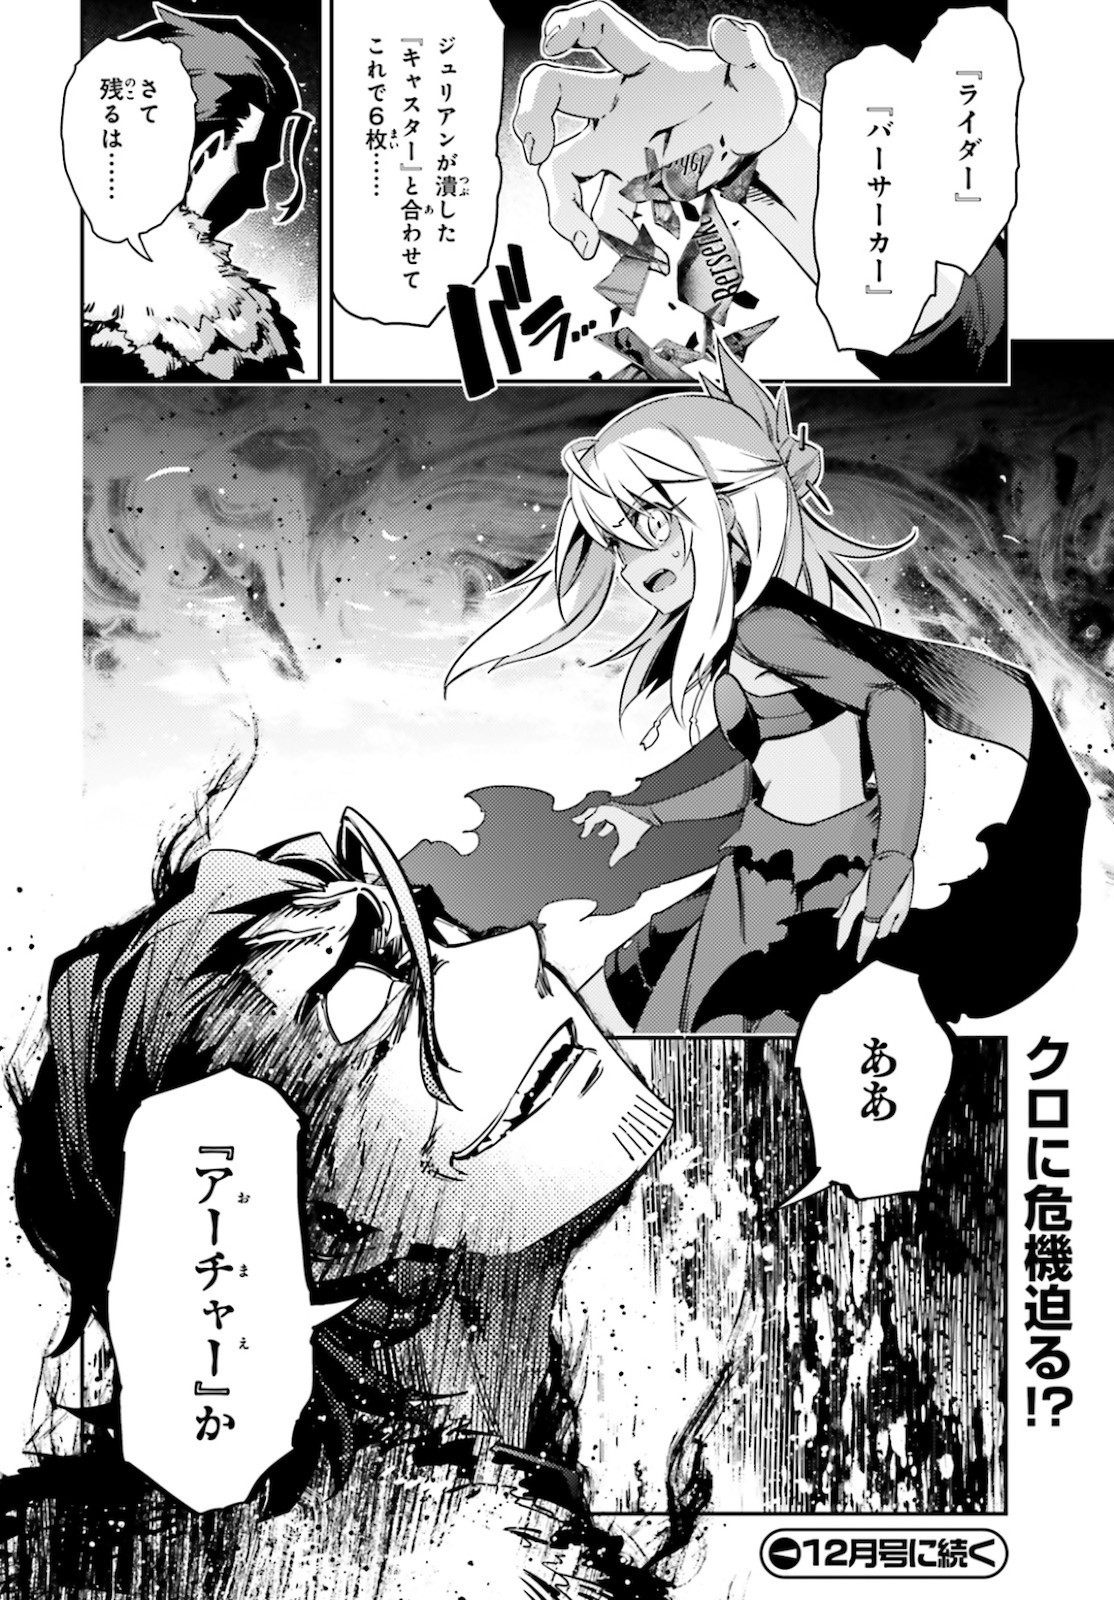 Fate/Kaleid Liner Prisma Illya Drei! - Chapter 59-1 - Page 16